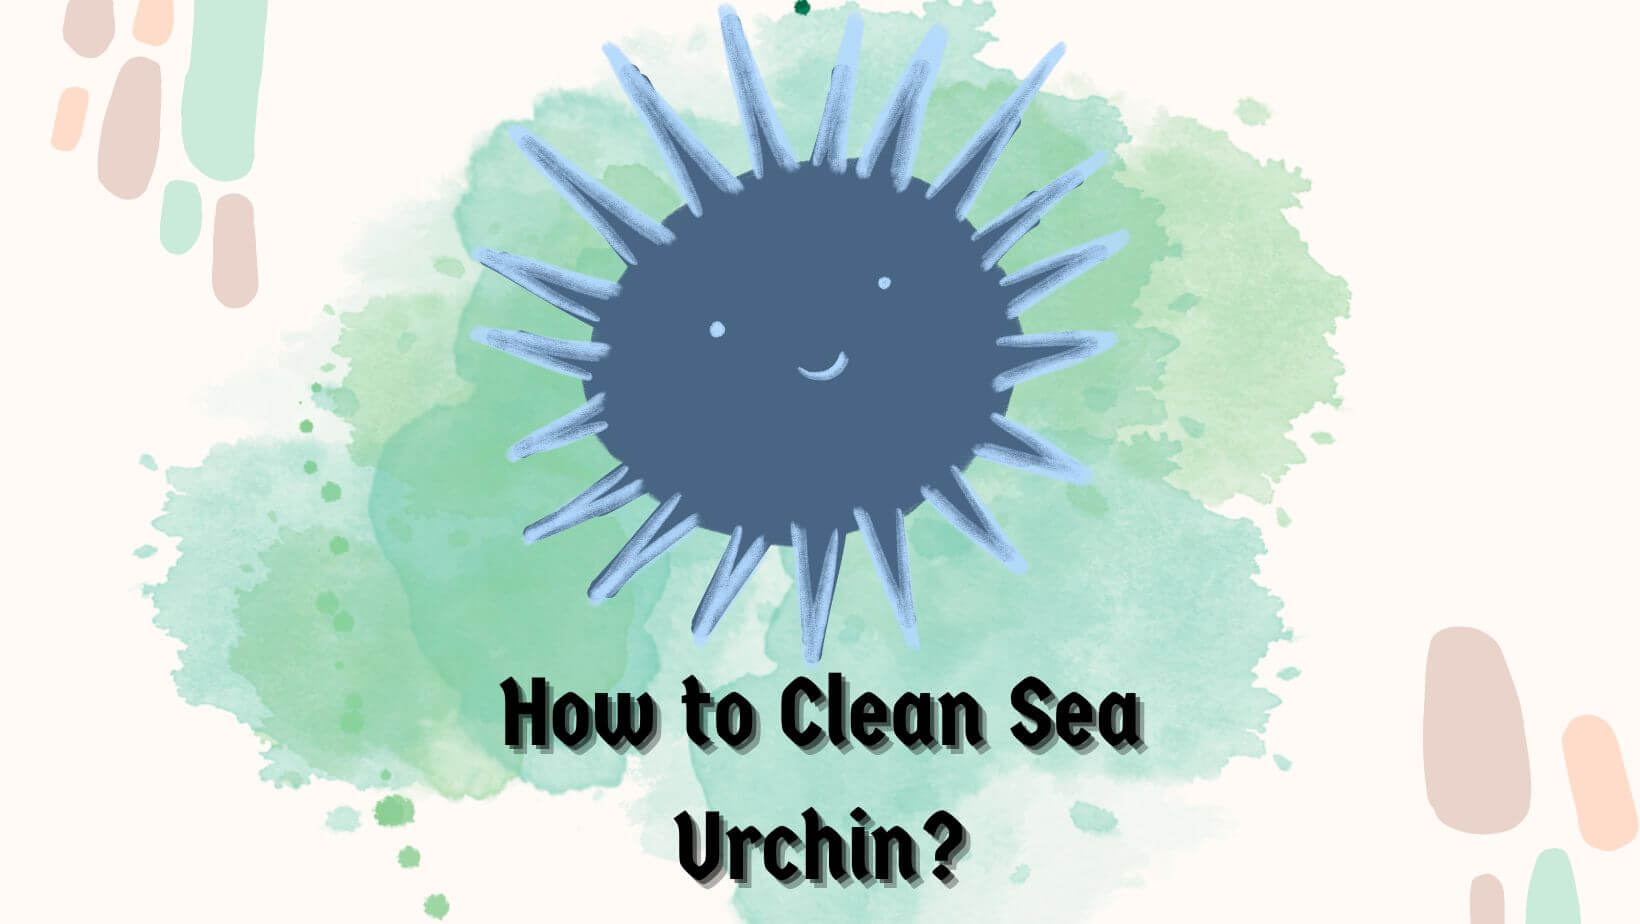 How to Clean Sea Urchin?